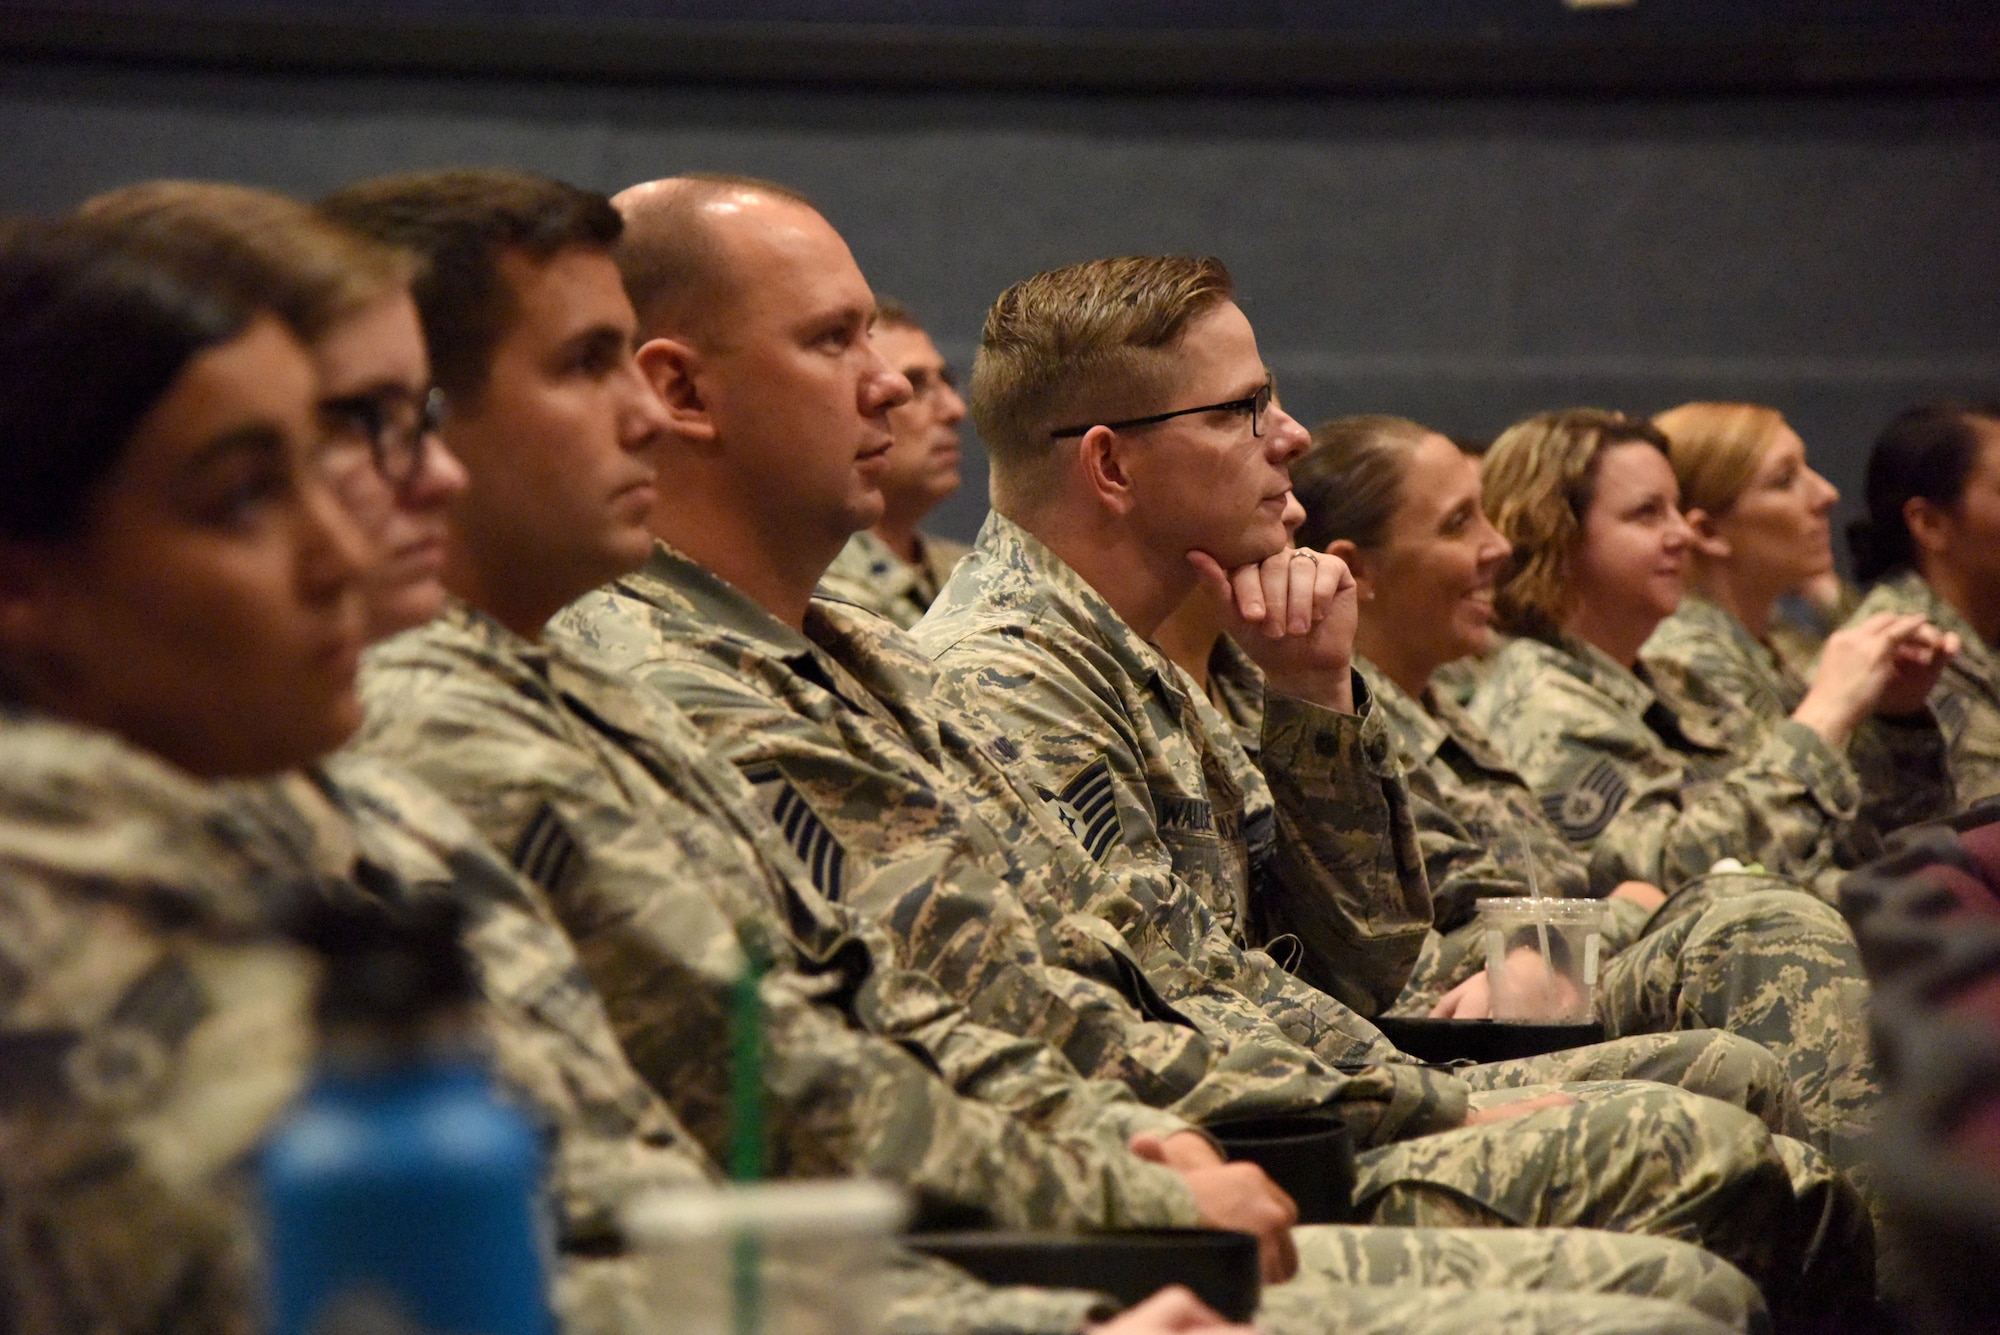 Keesler Airmen attend a 'Profiles in Courage' story-telling event at the Welch Theater at Keesler Air Force Base, Mississippi, Sept. 20, 2018. In recognition of suicide prevention and awareness month, military members shared their stories of bravery, strength and overcoming adversity with Keesler personnel. (U.S. Air Force photo by Kemberly Groue)